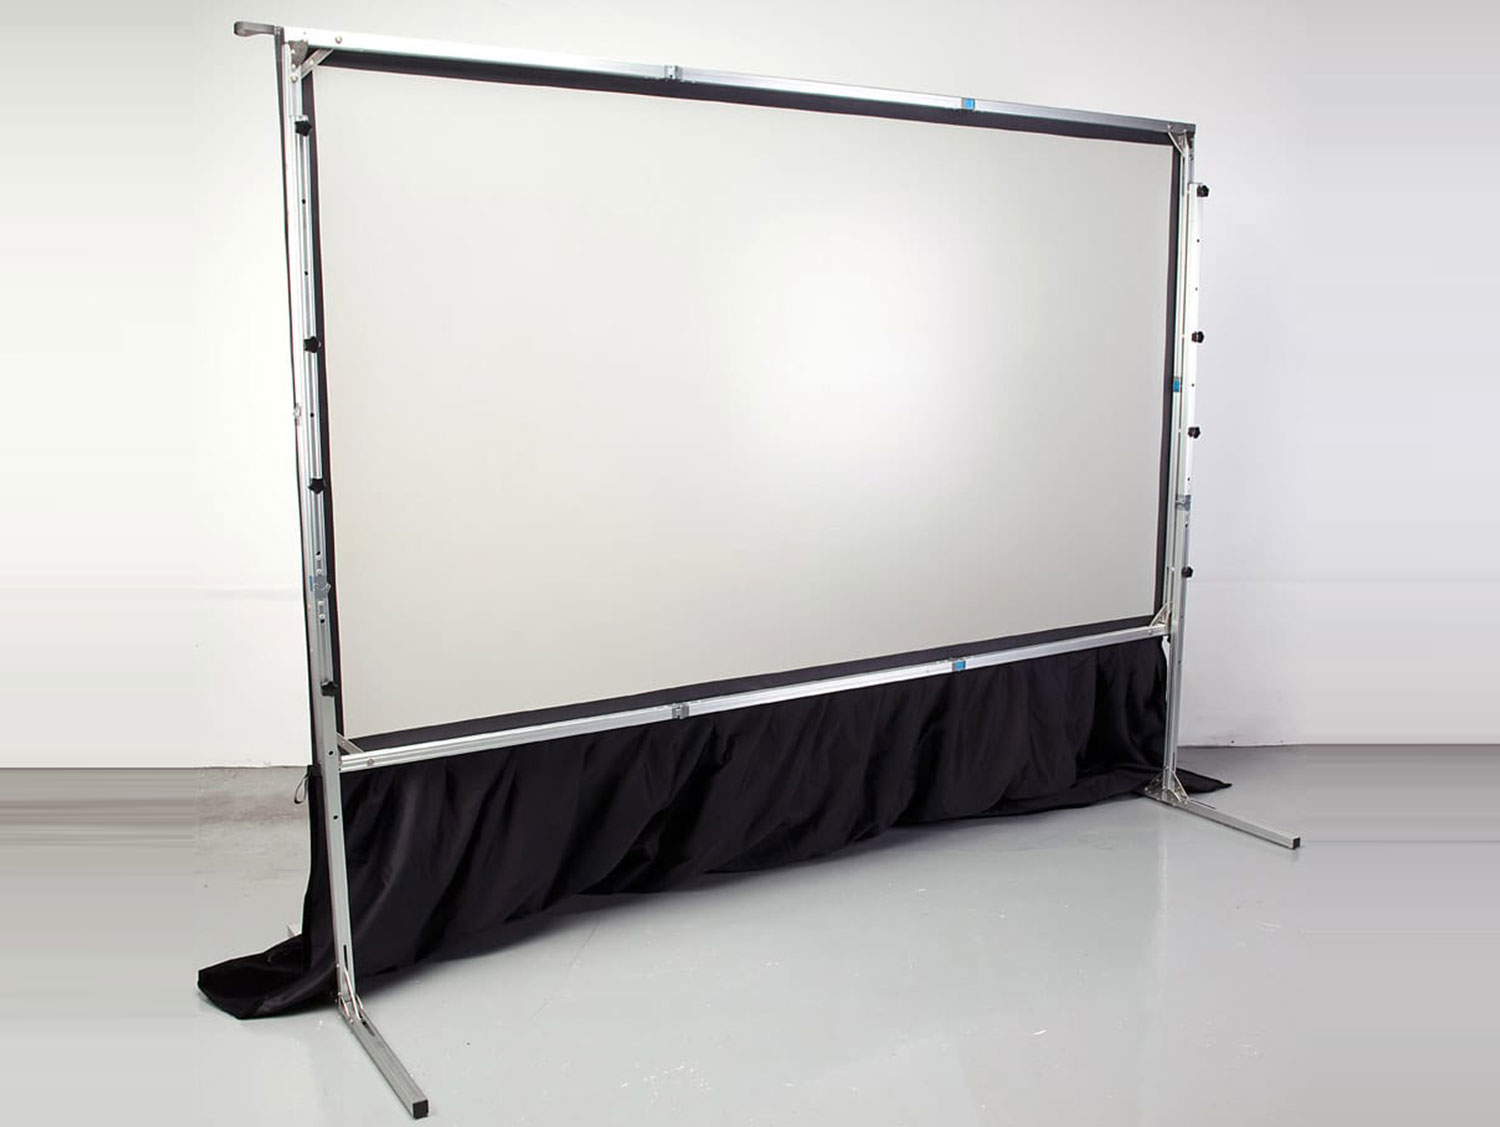 10 Feet Back Projector Screen for Rent